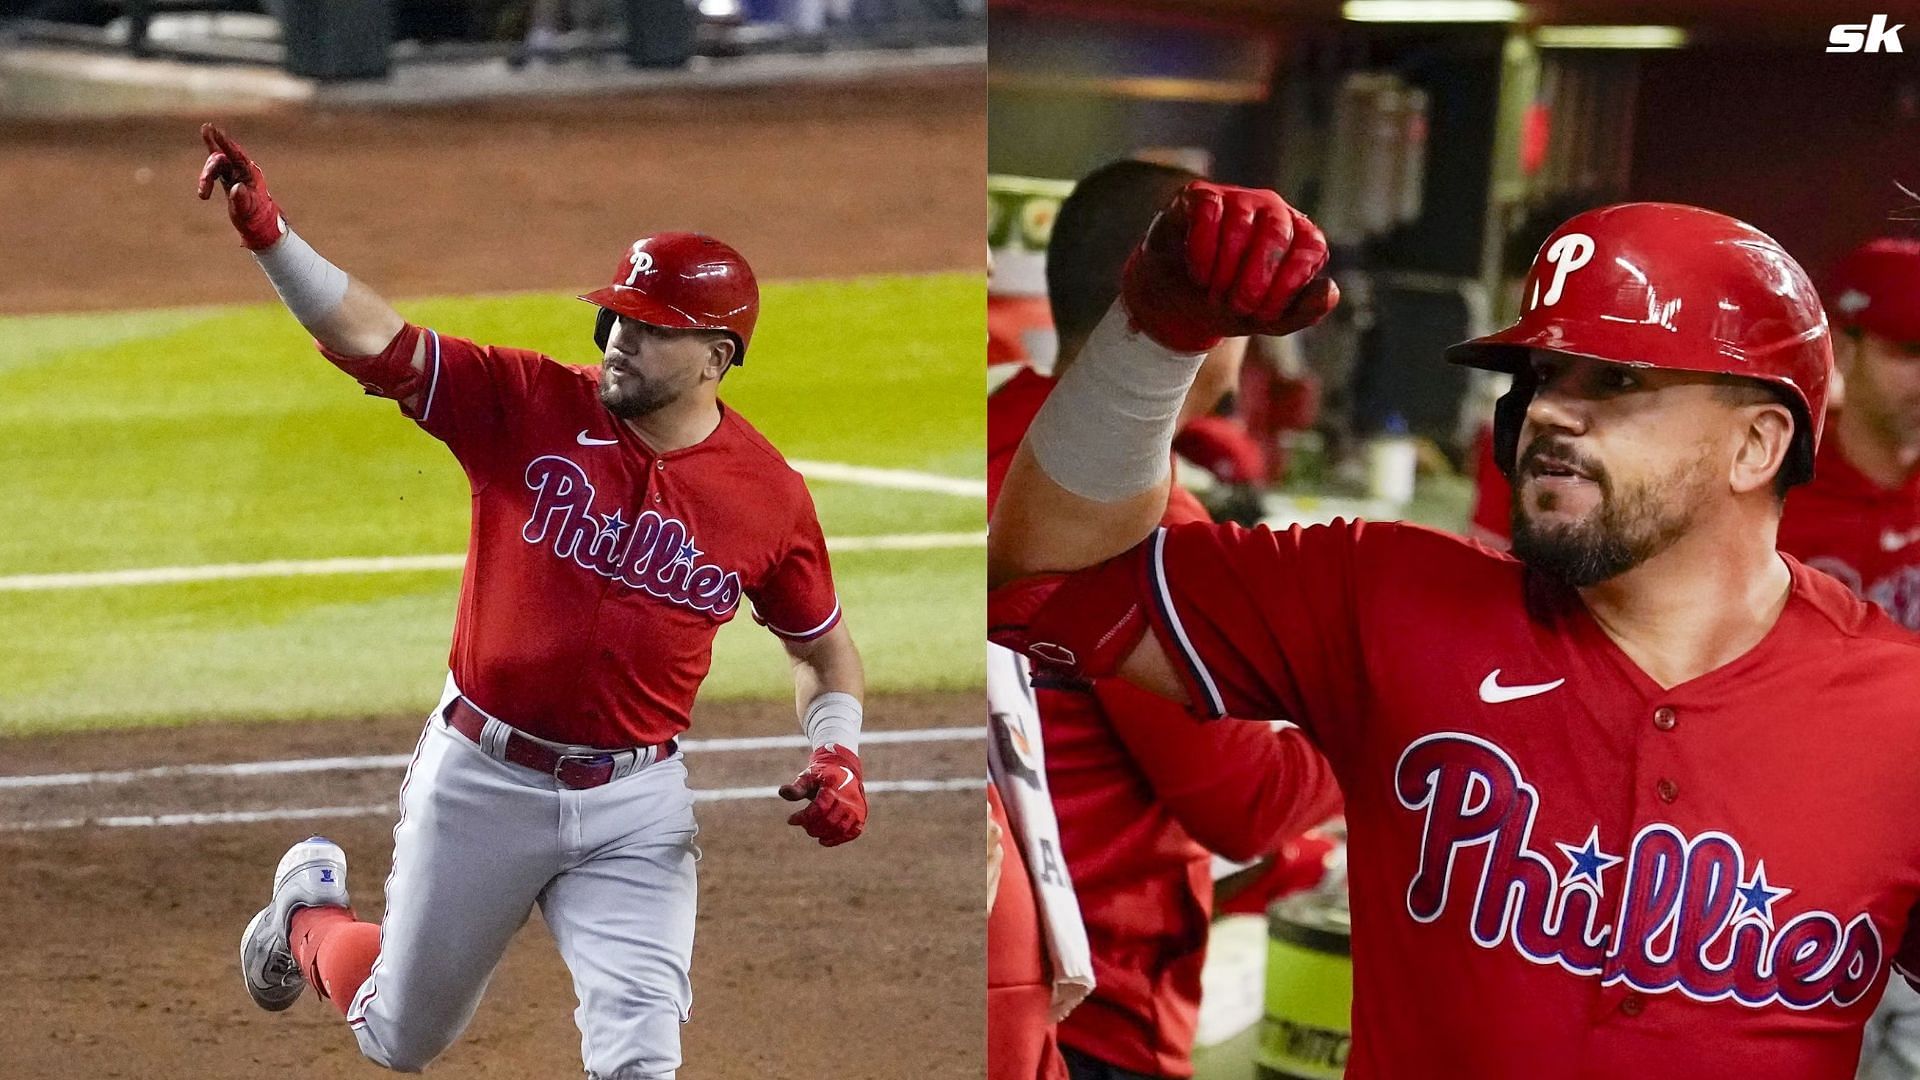 Got a new wallpaper - Link to image in comments : r/phillies